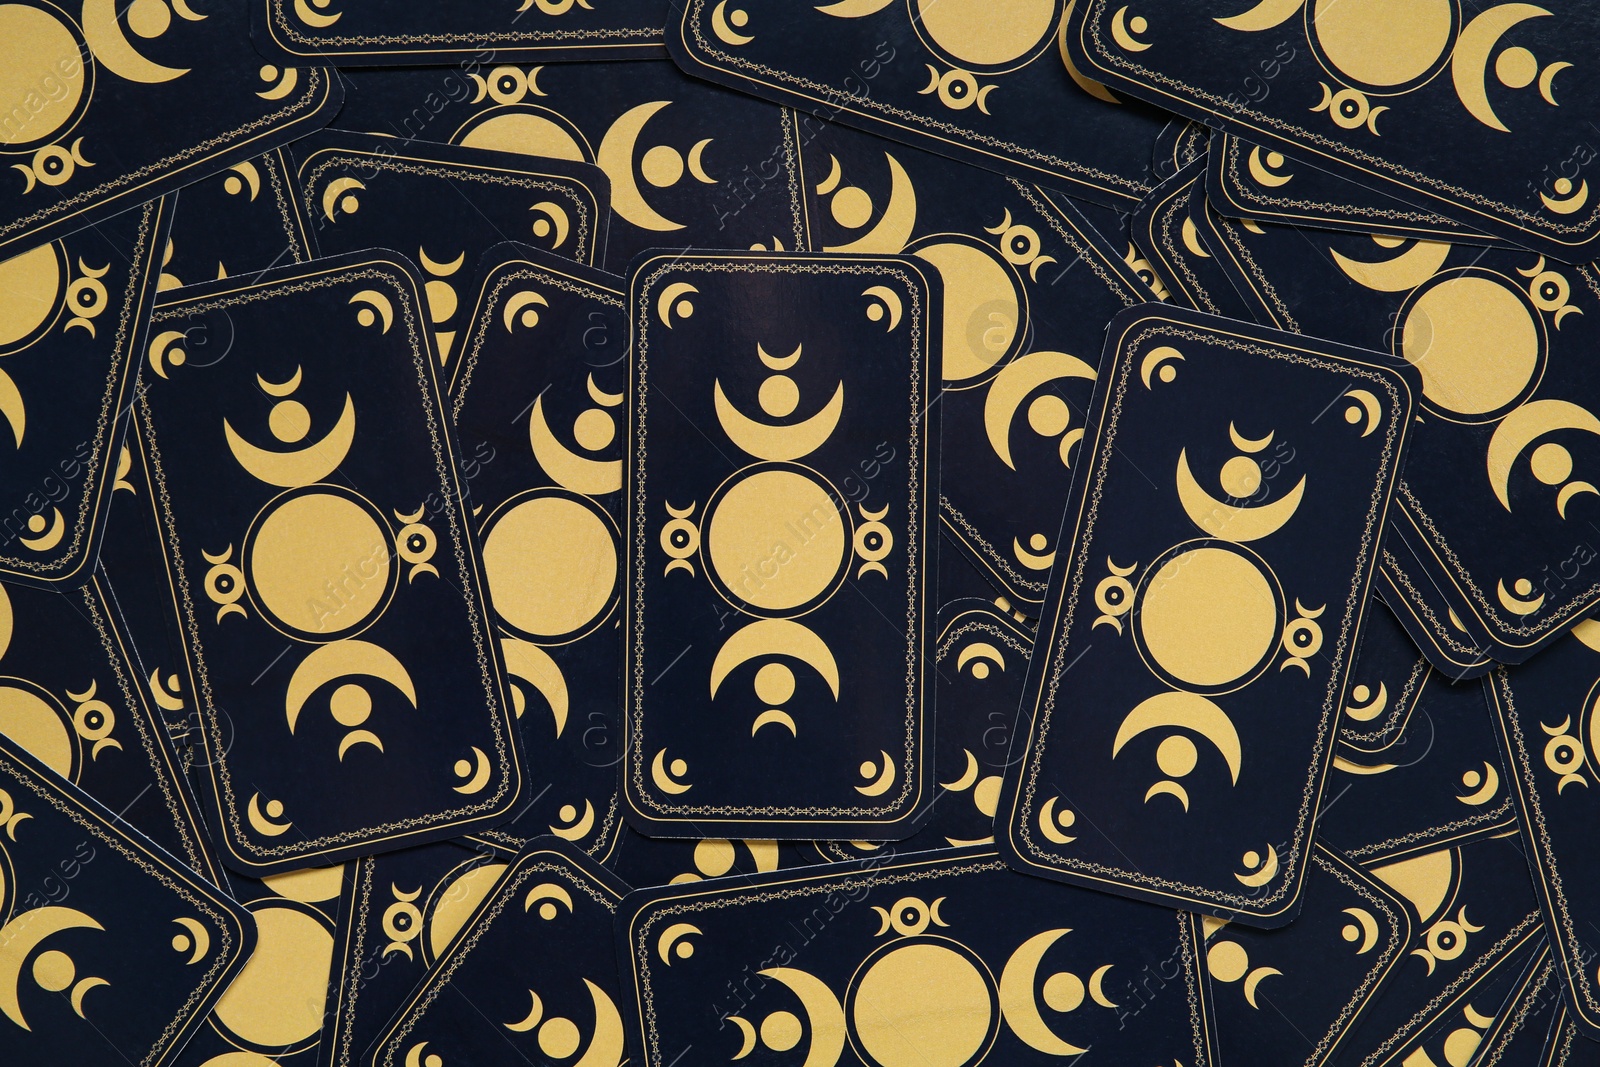 Photo of Tarot cards as background, top view. Reverse side